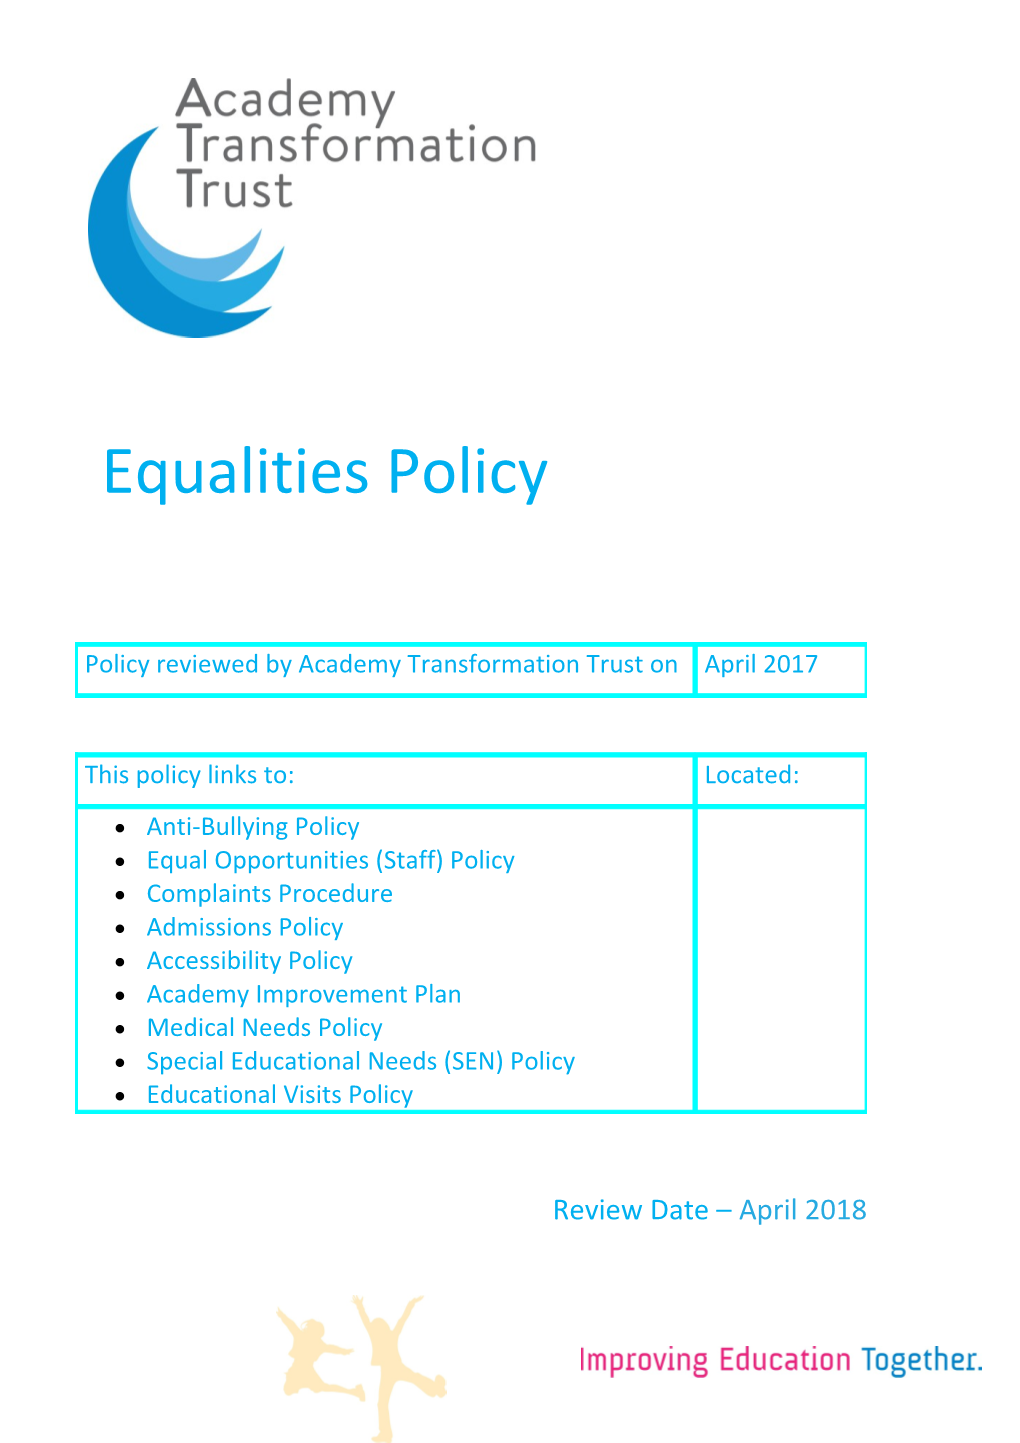 Equal Opportunities (Staff) Policy